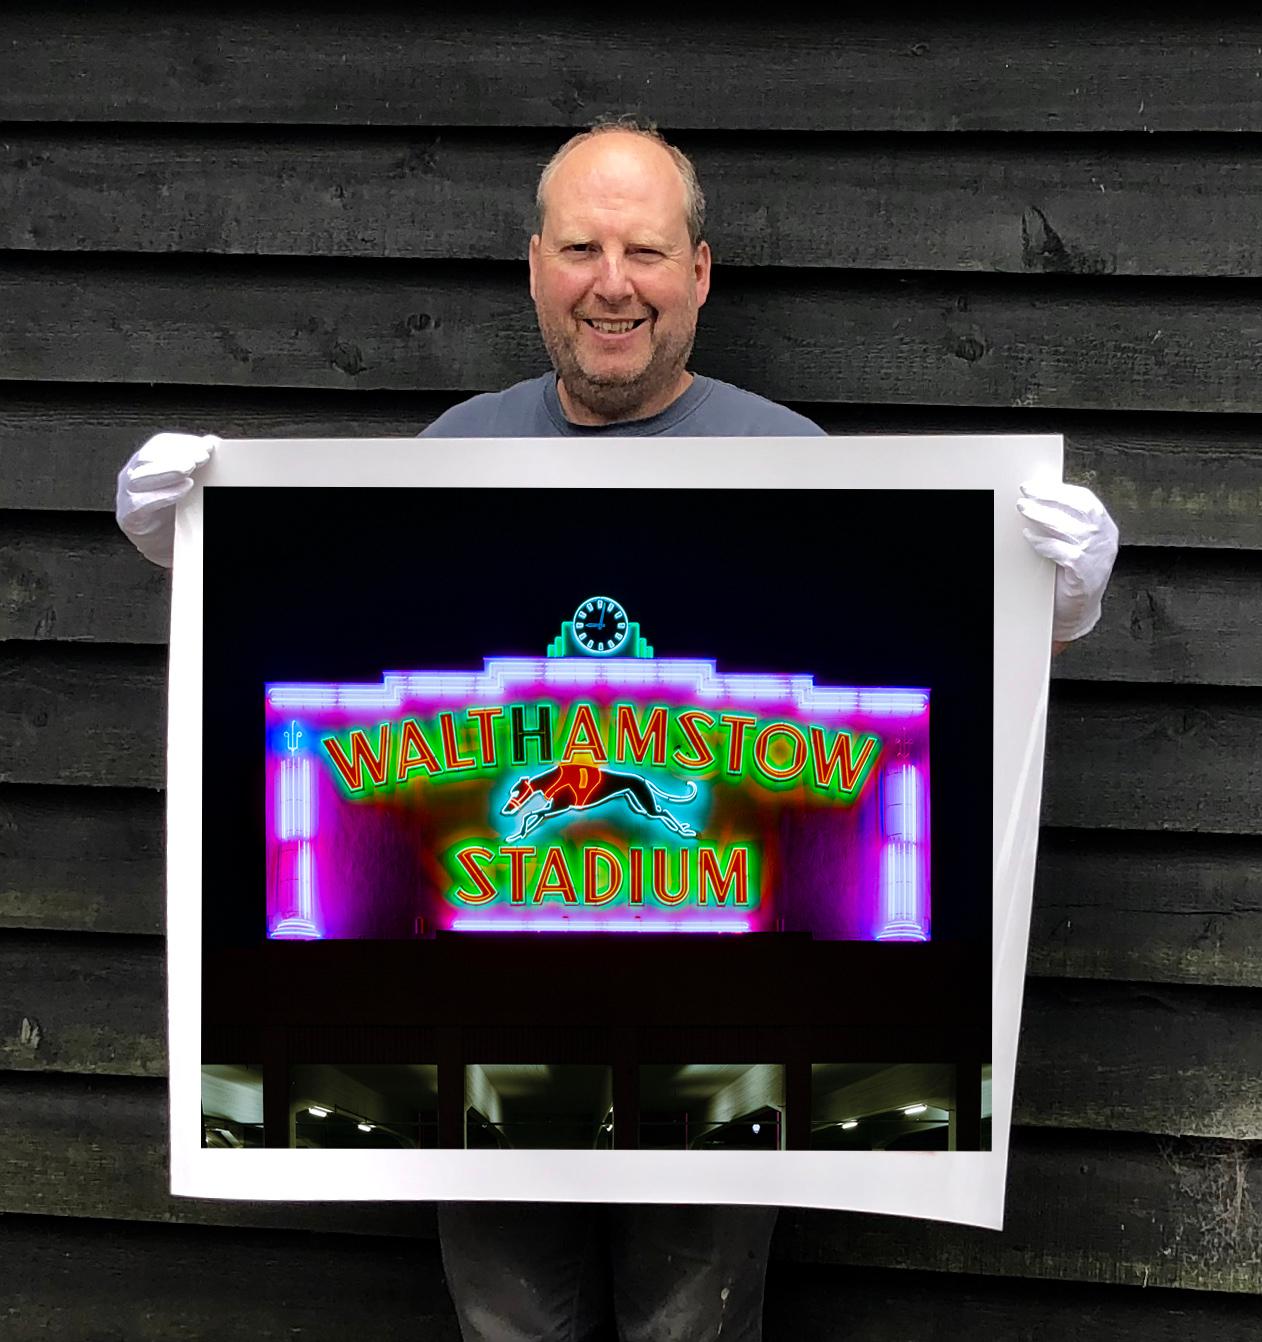 Iconic neon from London's North Circular landmark, the Walthamstow Stadium.

This artwork is a limited edition of 25, gloss photographic print, dry-mounted to aluminium, presented in a museum board white window mount and a choice of black or white